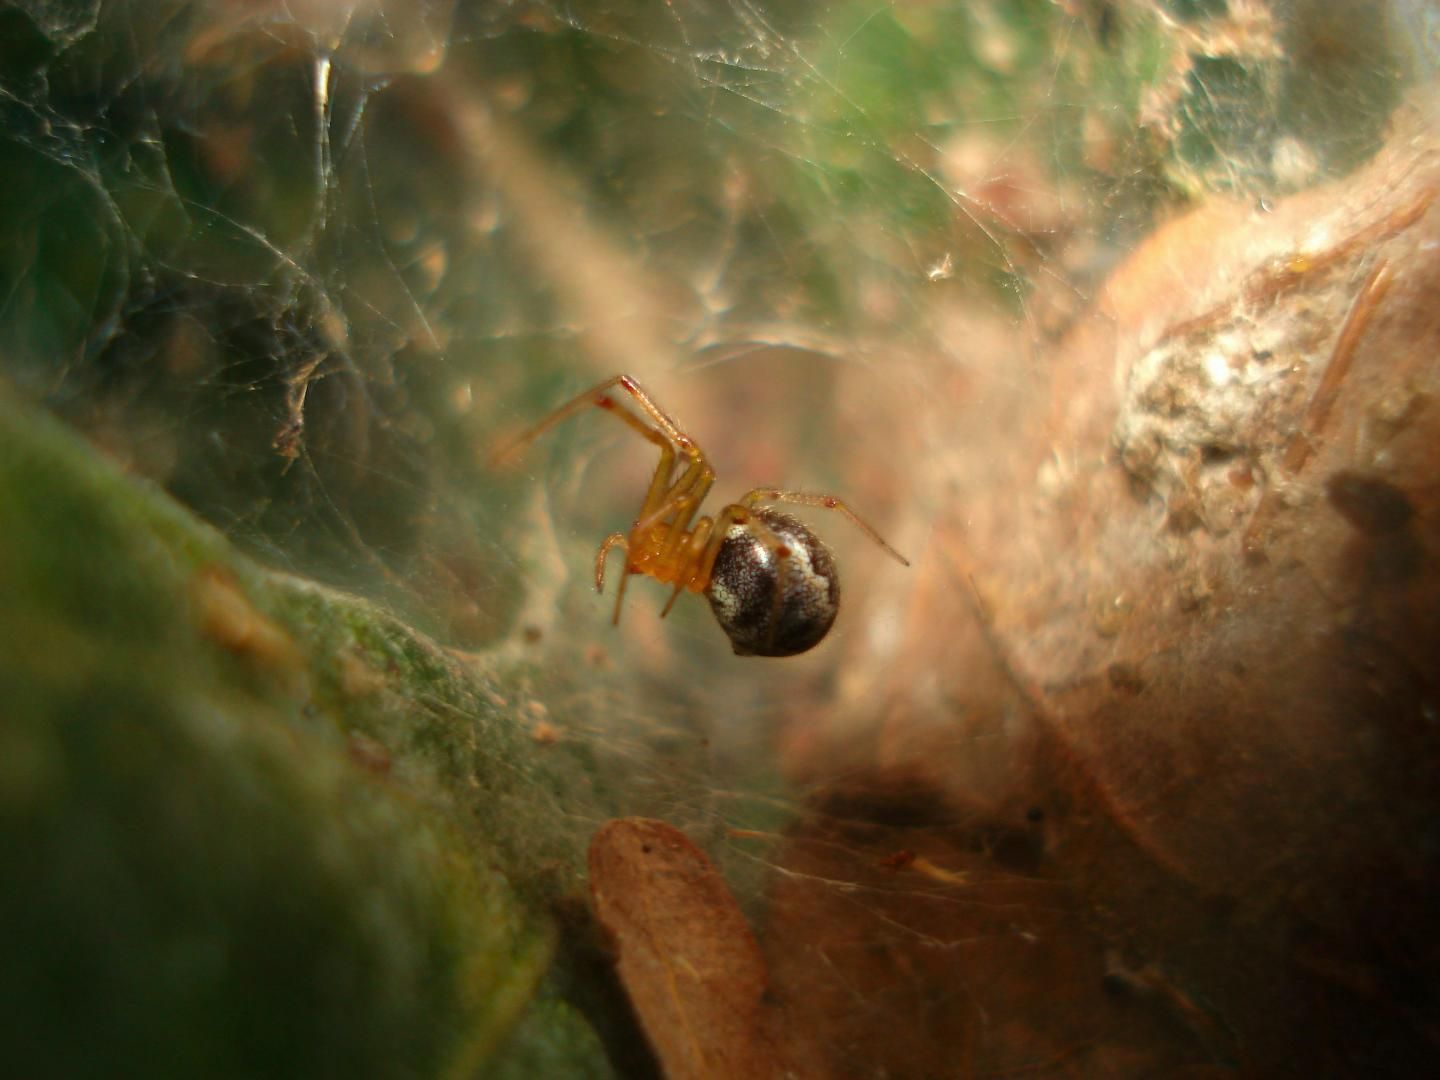 Male orb-weaving spiders fight less in female-dominated colonies